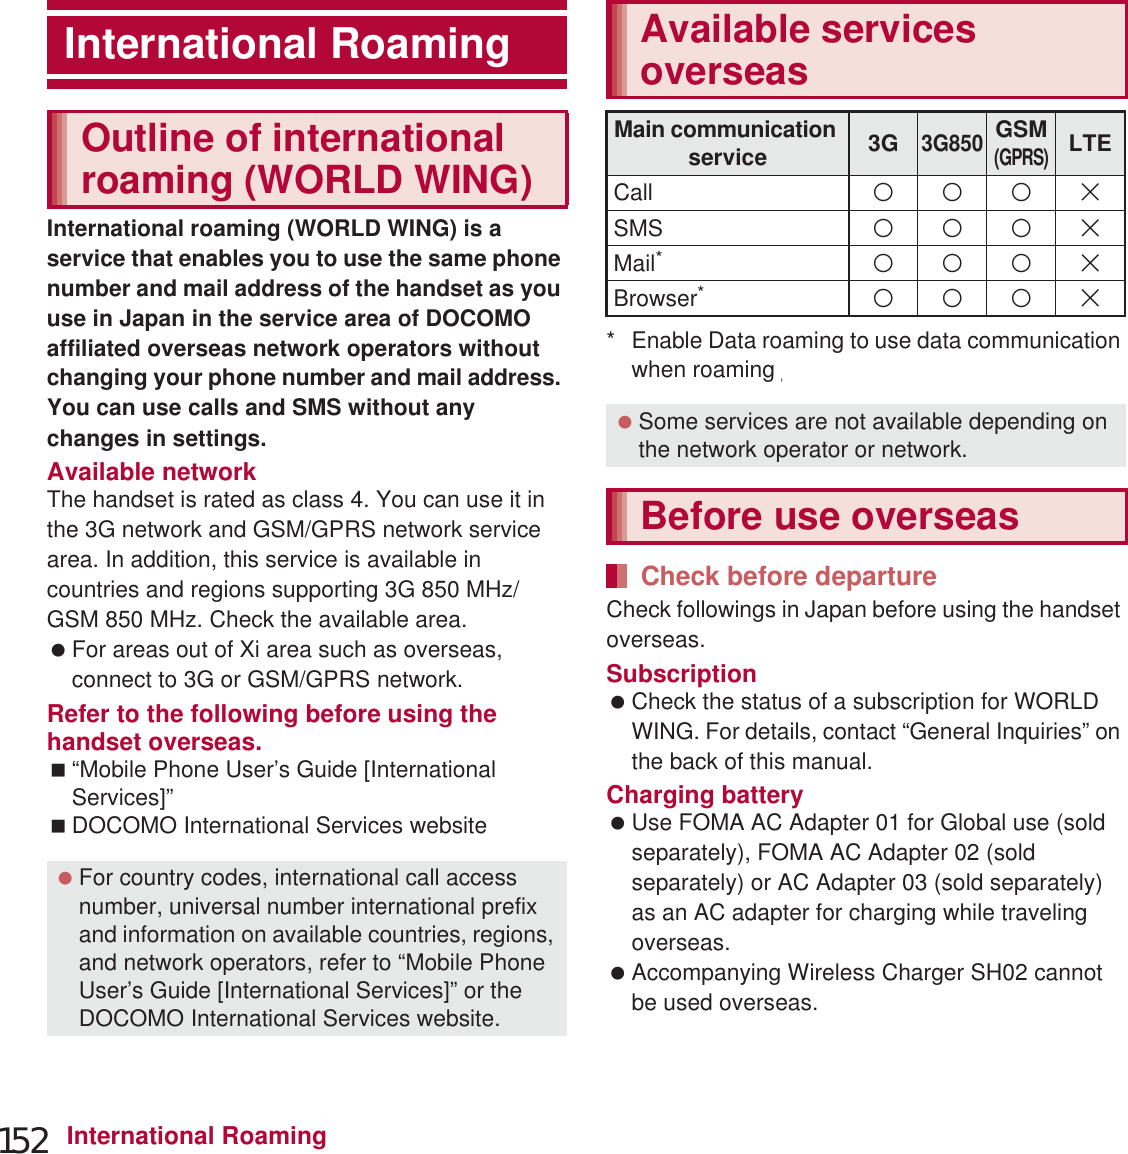 152 International RoamingInternational roaming (WORLD WING) is a service that enables you to use the same phone number and mail address of the handset as you use in Japan in the service area of DOCOMO affiliated overseas network operators without changing your phone number and mail address. You can use calls and SMS without any changes in settings.Available networkThe handset is rated as class 4. You can use it in the 3G network and GSM/GPRS network service area. In addition, this service is available in countries and regions supporting 3G 850 MHz/GSM 850 MHz. Check the available area. For areas out of Xi area such as overseas, connect to 3G or GSM/GPRS network.Refer to the following before using the handset overseas.“Mobile Phone User’s Guide [International Services]”DOCOMO International Services website* Enable Data roaming to use data communication when roaming (nP. 154).Check followings in Japan before using the handset overseas.Subscription Check the status of a subscription for WORLD WING. For details, contact “General Inquiries” on the back of this manual.Charging battery Use FOMA AC Adapter 01 for Global use (sold separately), FOMA AC Adapter 02 (sold separately) or AC Adapter 03 (sold separately) as an AC adapter for charging while traveling overseas. Accompanying Wireless Charger SH02 cannot be used overseas.International RoamingOutline of international roaming (WORLD WING) For country codes, international call access number, universal number international prefix and information on available countries, regions, and network operators, refer to “Mobile Phone User’s Guide [International Services]” or the DOCOMO International Services website.Available services overseasMain communication service 3G3G850GSM(GPRS)LTECall AAABSMS AAABMail*AAABBrowser*AAAB Some services are not available depending on the network operator or network.Before use overseasCheck before departuree Data roaming to roaming 